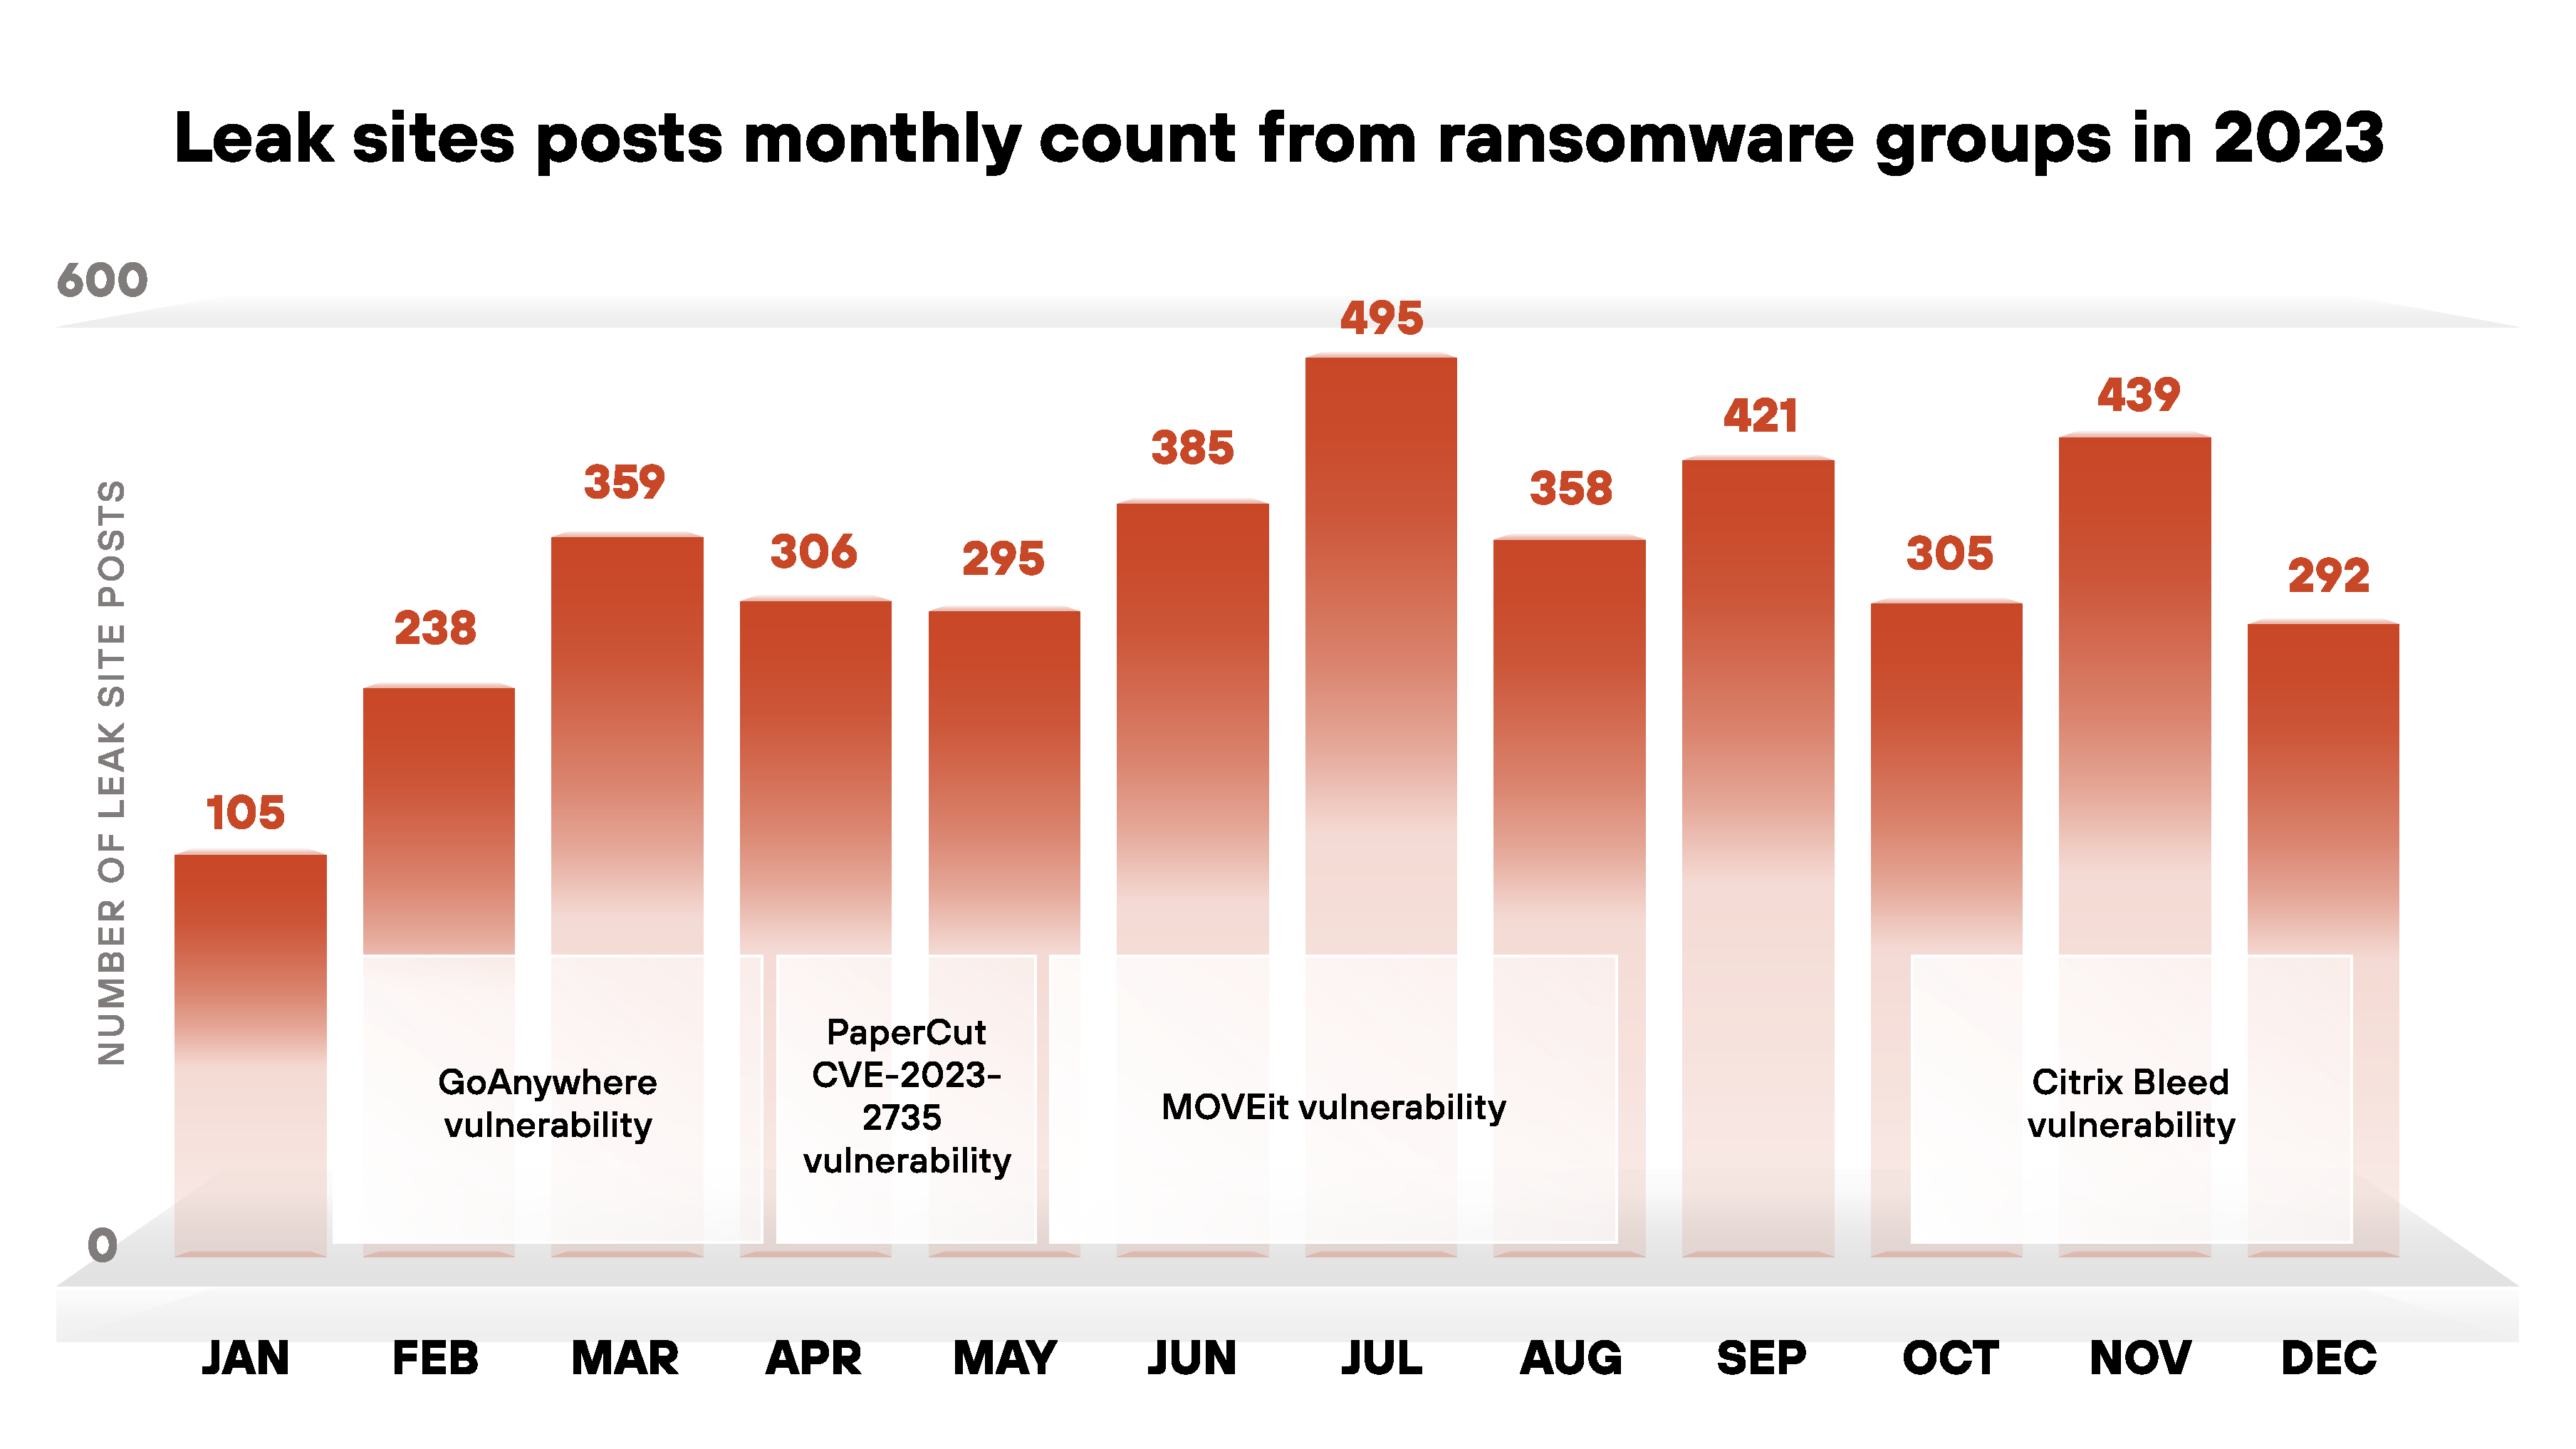 Image 2 is a bar graph comparing monthly counts of leak site posts by ransomware groups in 2023. Included are specific vulnerabilities. These include GoAnywhere, PaperCut CVE-2023-27350, MOVEit and Citrix Bleed. 